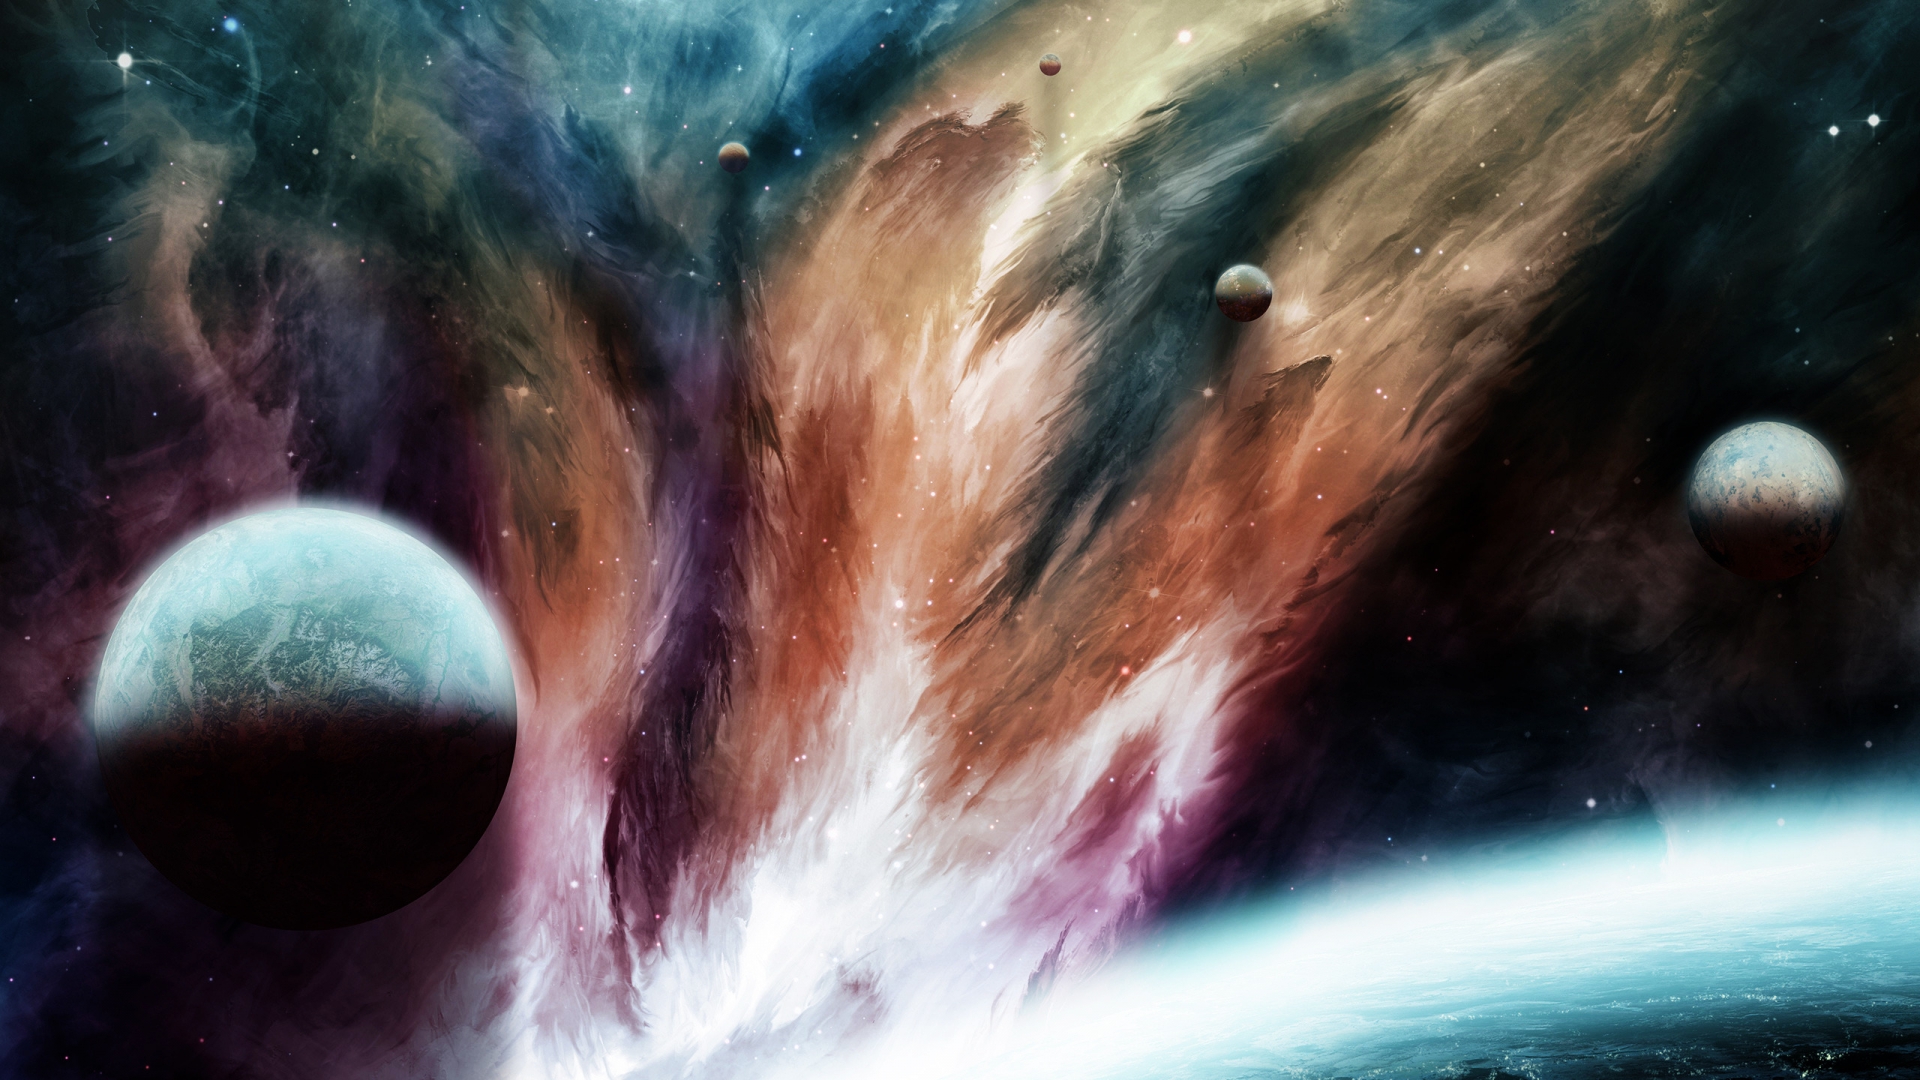 Fantasy Space Painting for 1920 x 1080 HDTV 1080p resolution